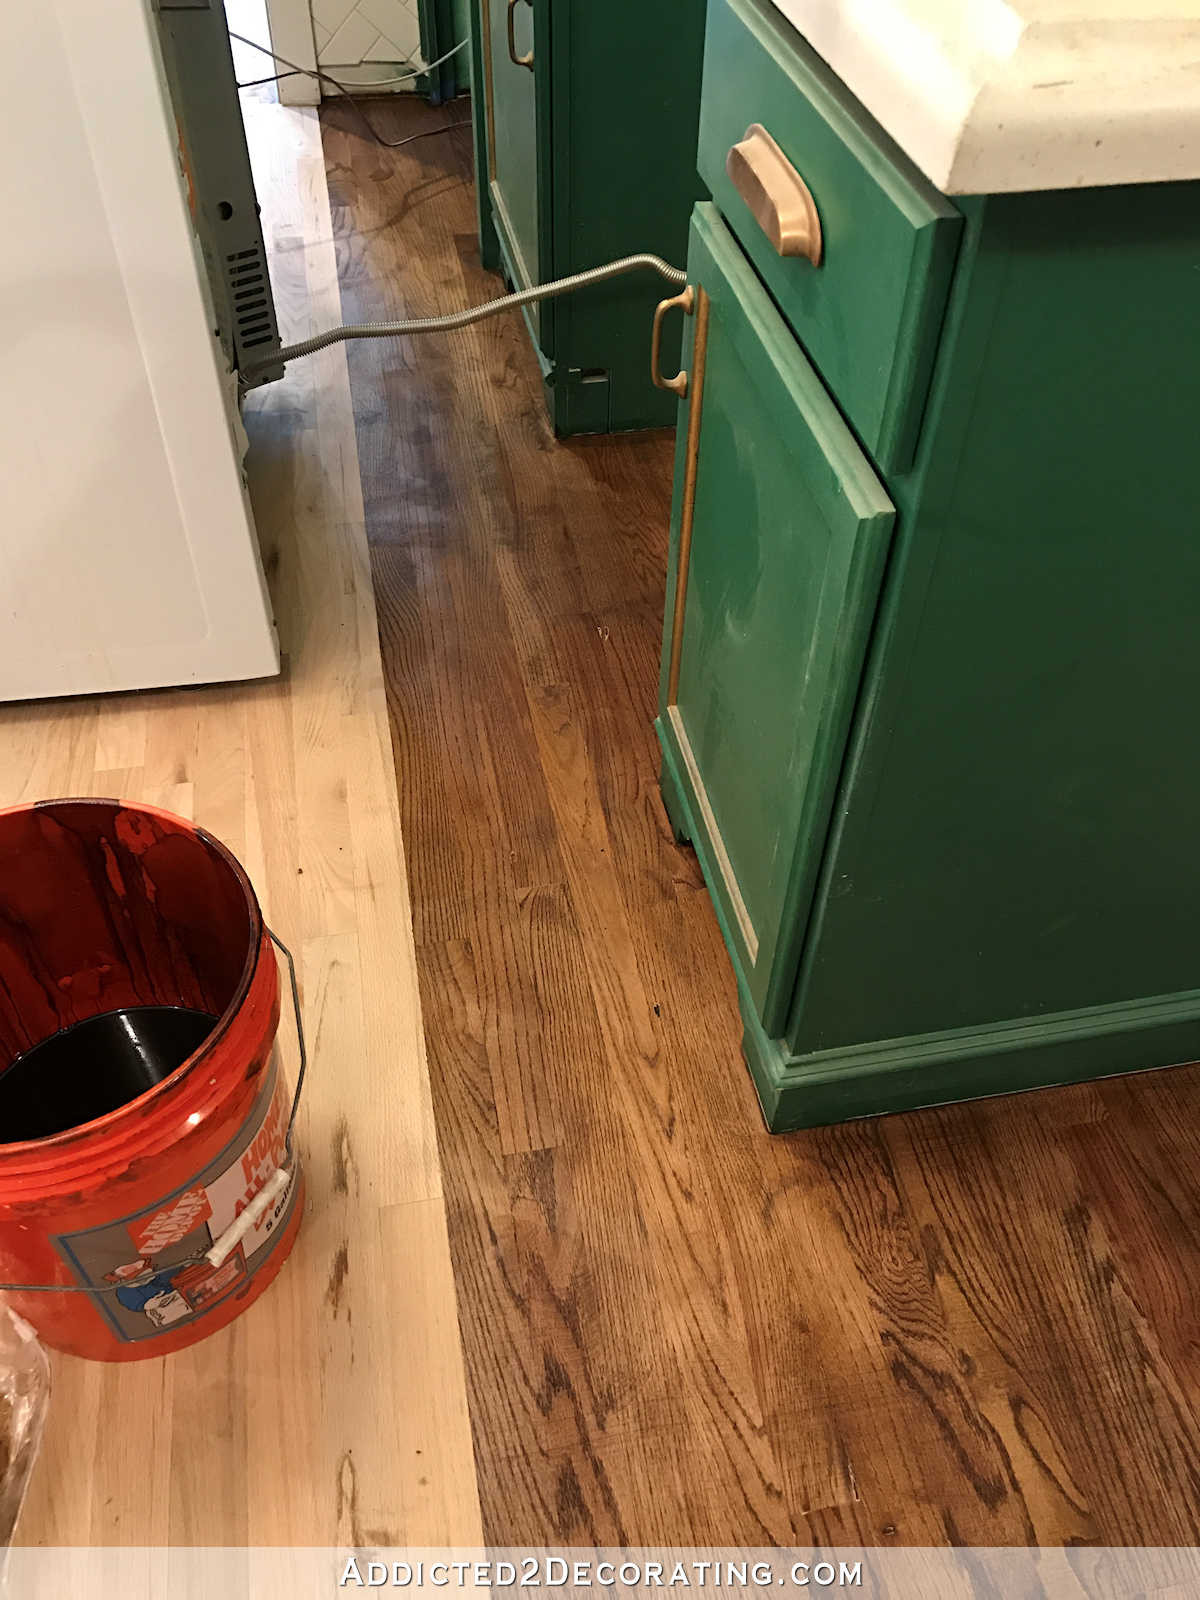 staining hardwood floors how long to dry of adventures in staining my red oak hardwood floors products process within staining red oak hardwood floors 10 stain on kitchen floor behind stove and refrigerator